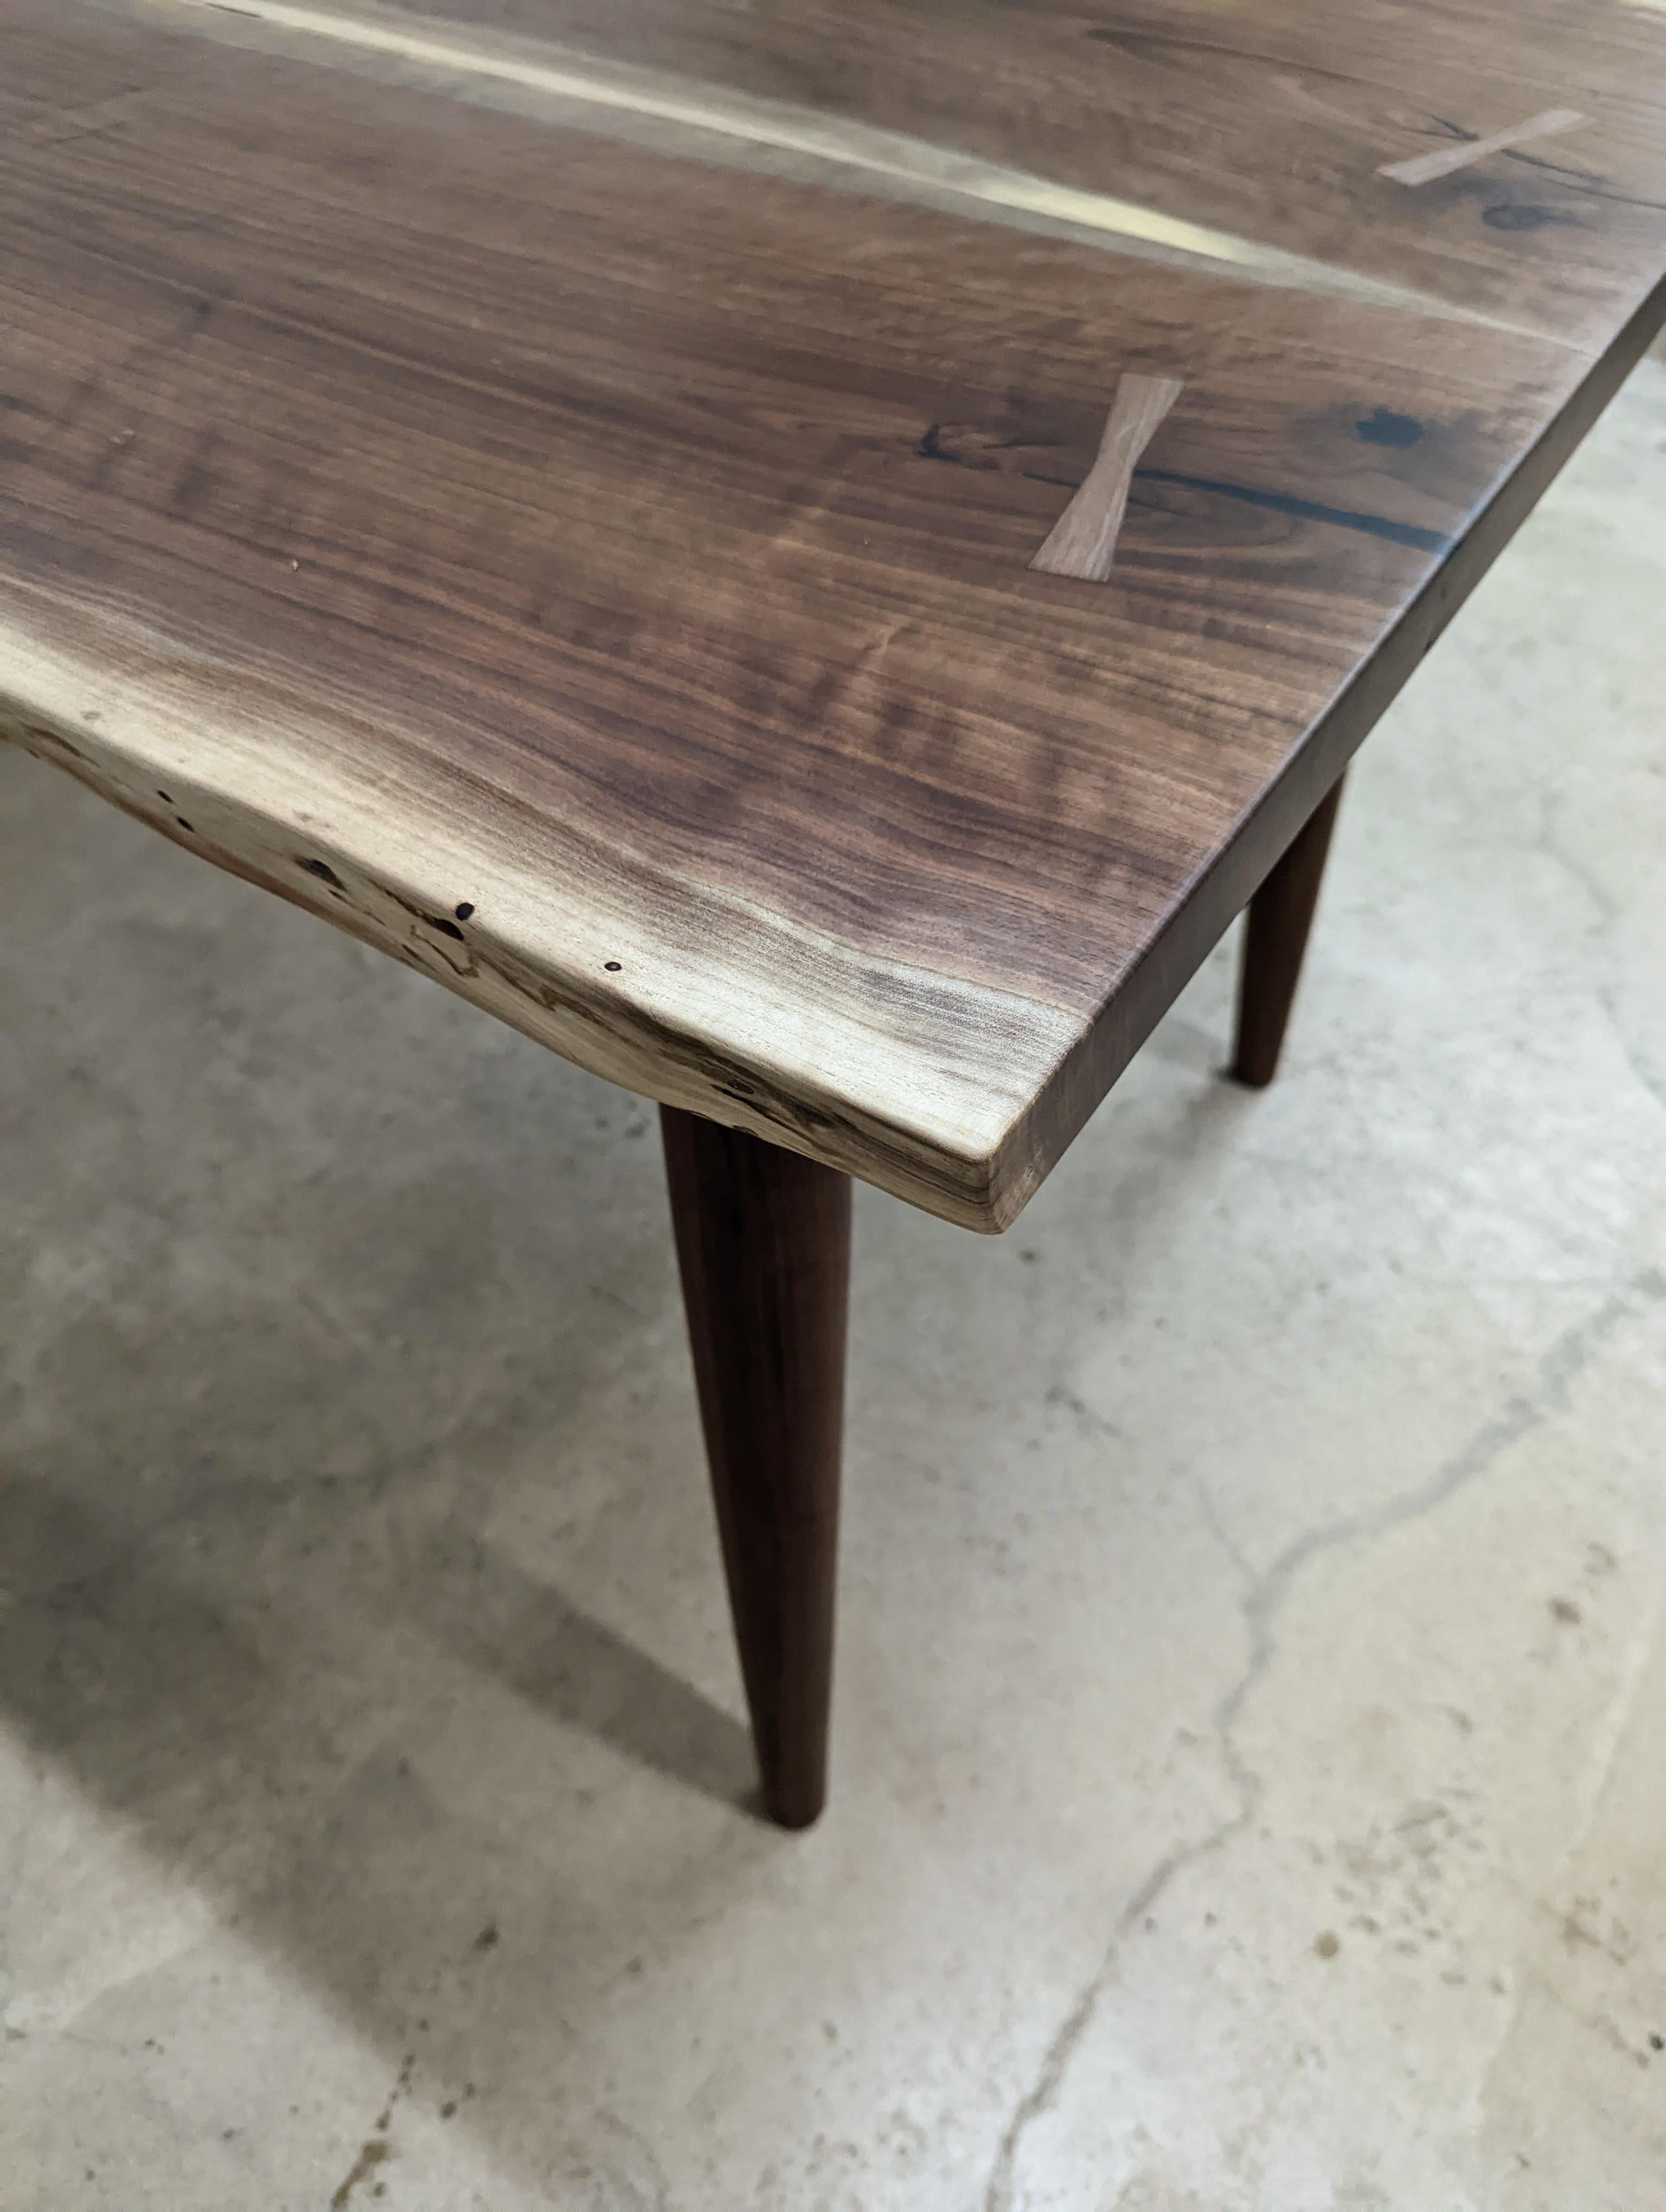 Hand-Crafted Bespoke Black Walnut Dining Table